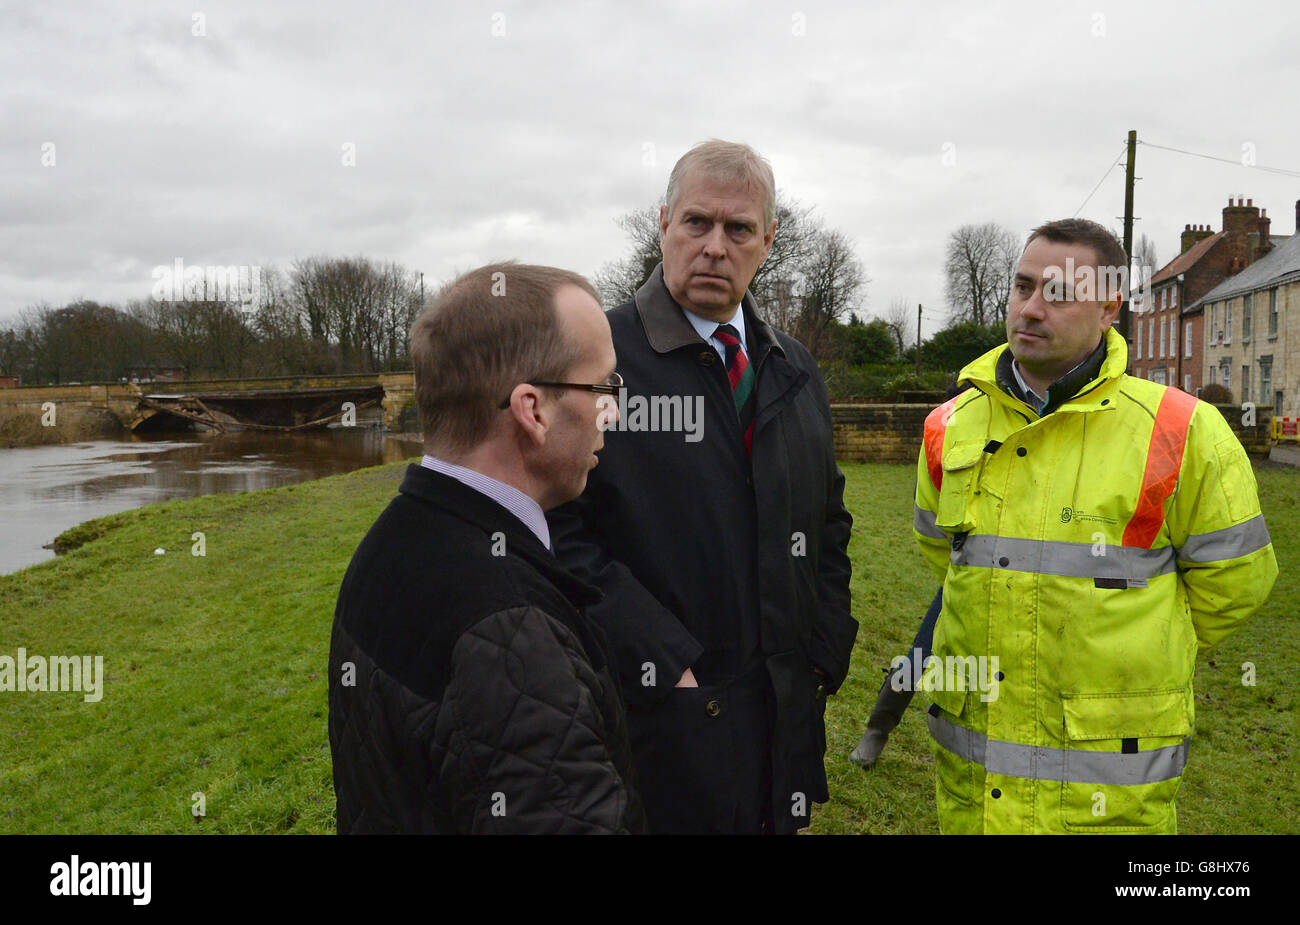 The Duke of York talks to Andrew Wood, Senior Engineer with North Yorkshire County Council (right), and Richard Sweeting, Chairman of Selby District Council, as they look at the damaged bridge over the River Wharfe in Tadcaster, during his visit to the area to view flood damage. Stock Photo